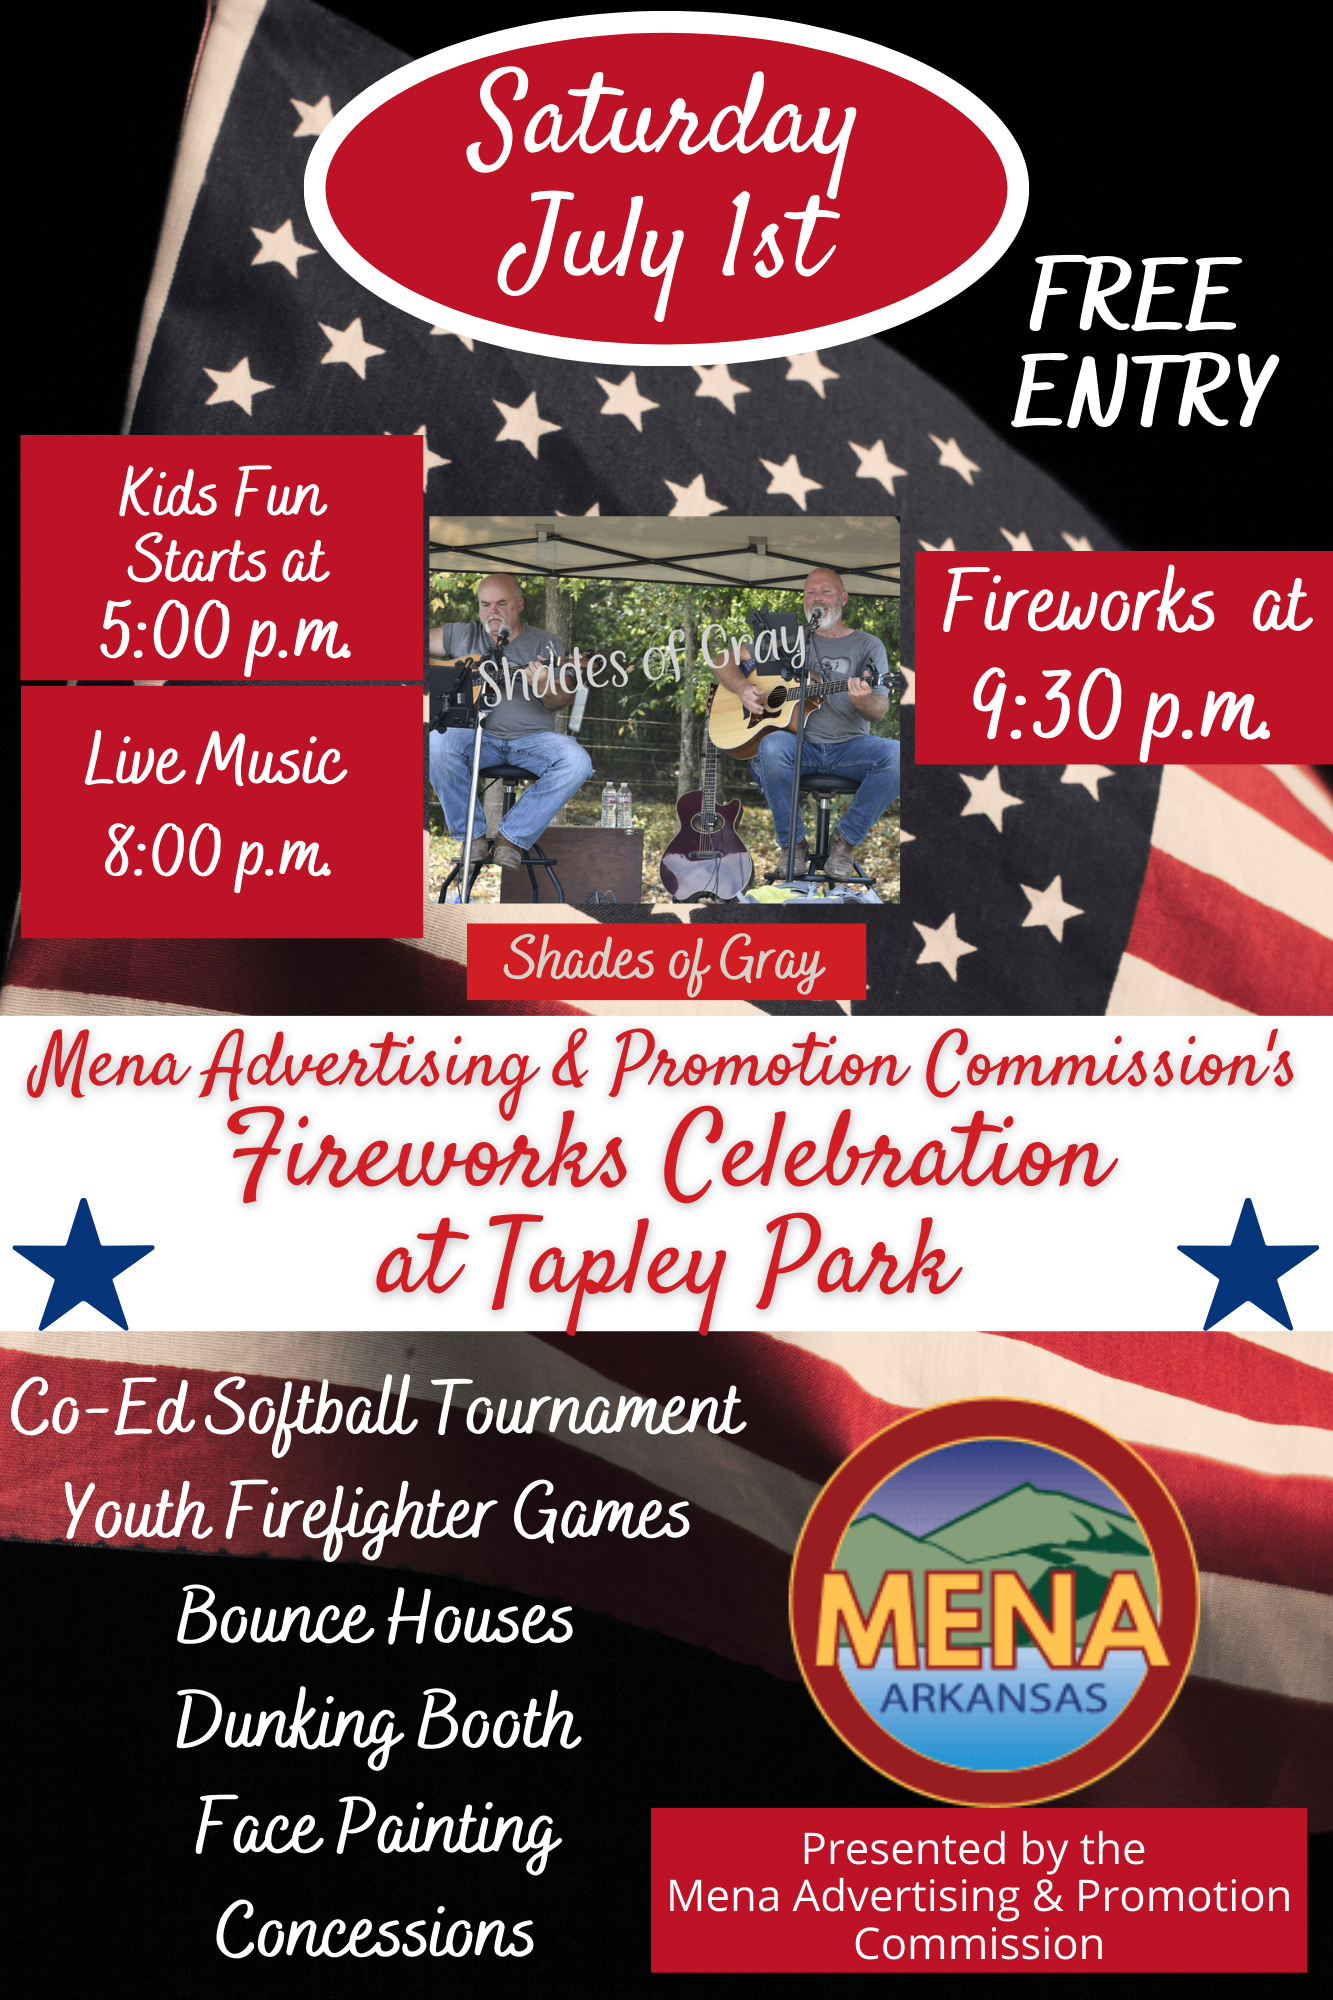 ami tamir recommends menan 4th of july pic